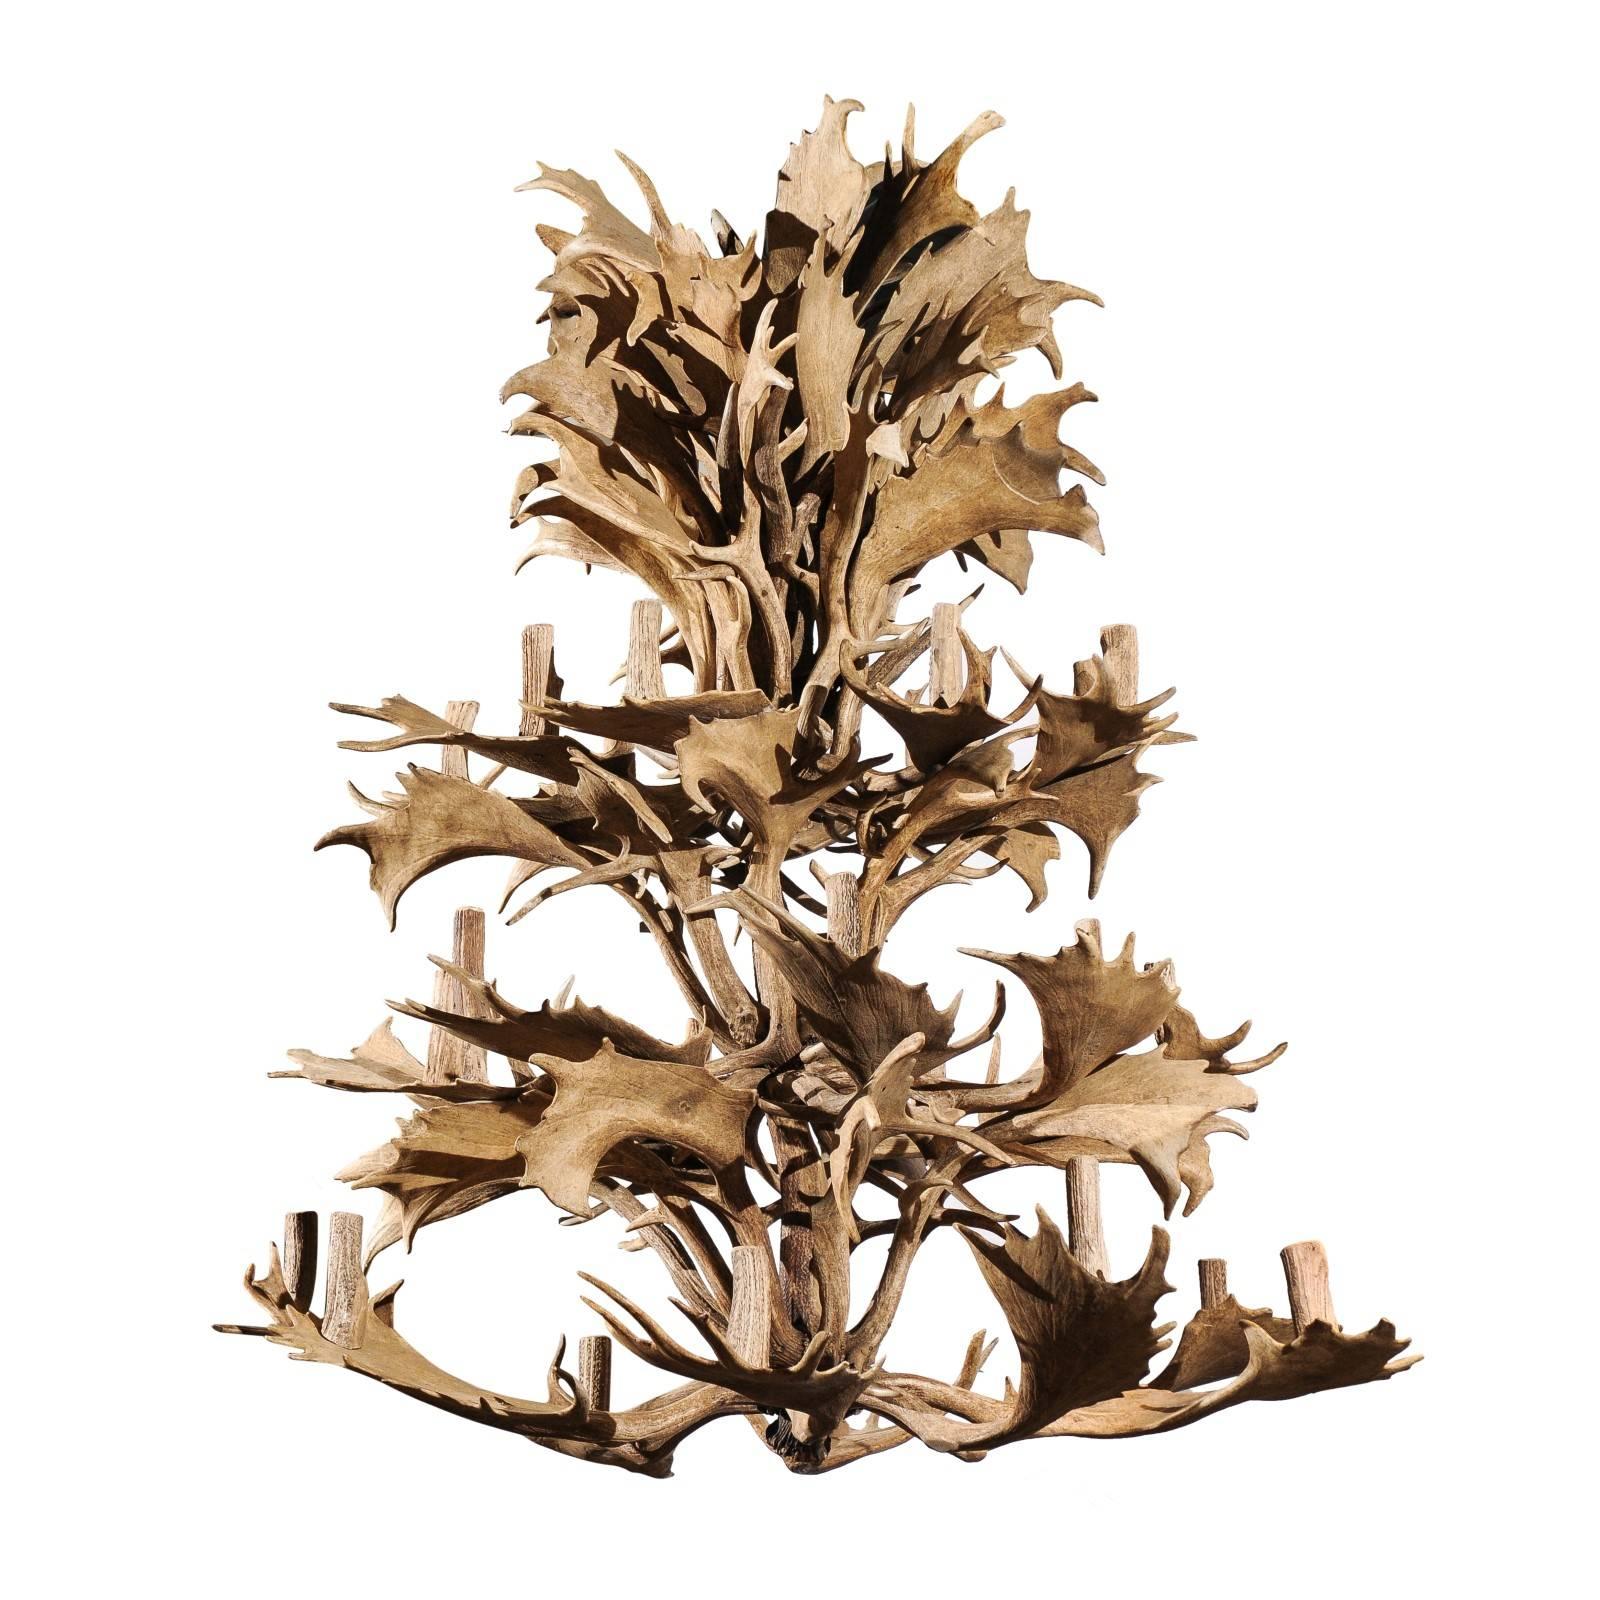 Naturally Shed 24-Light Antler Chandelier from the 1940s, Rewired for the US